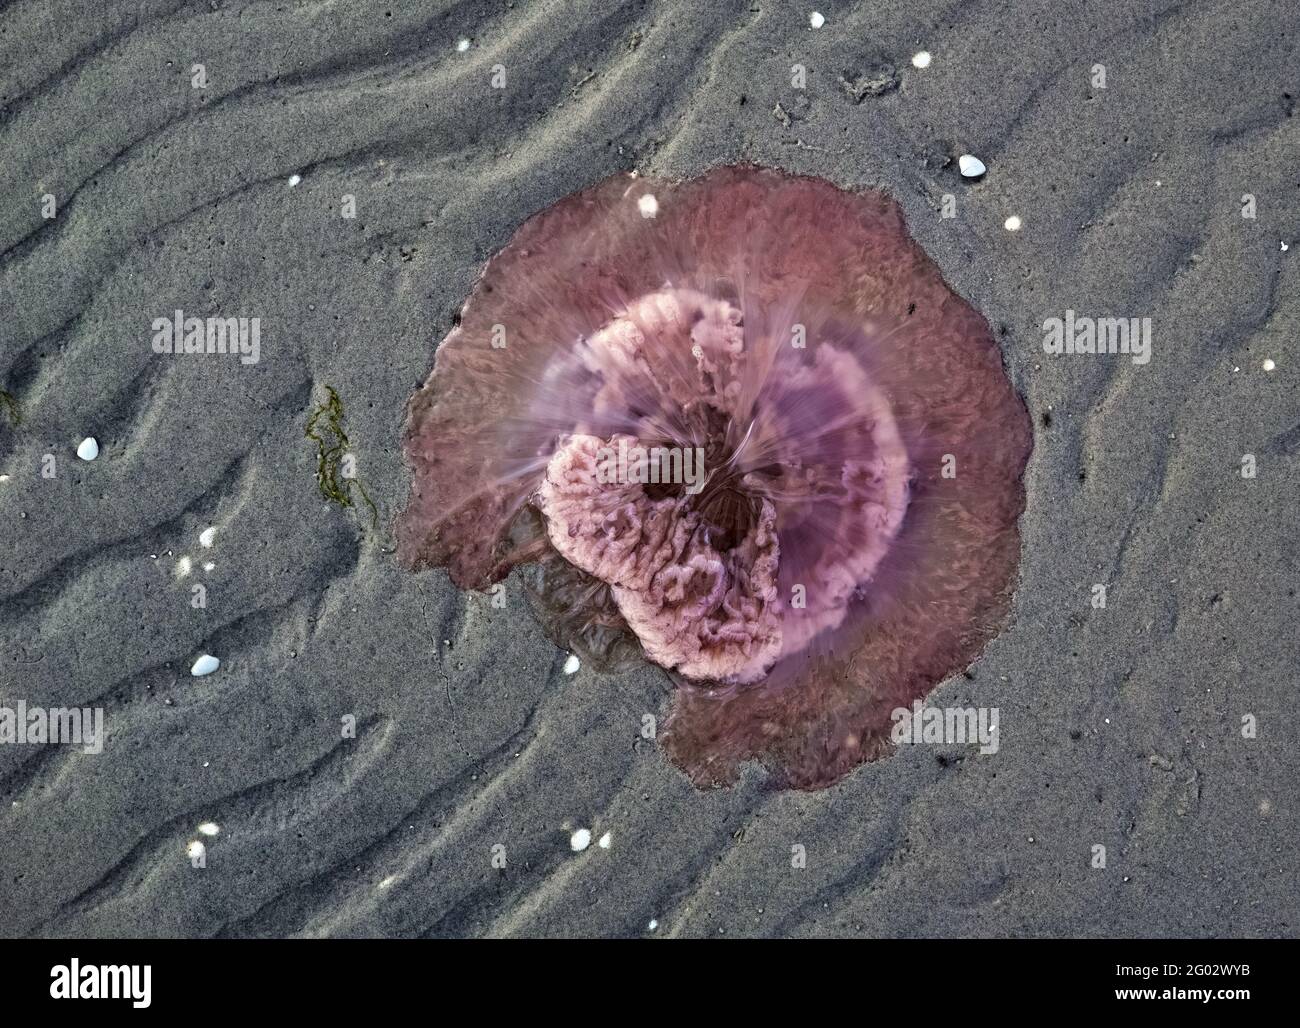 A stranded fire jellyfish on the Baltic Sea in Denmark. Stock Photo